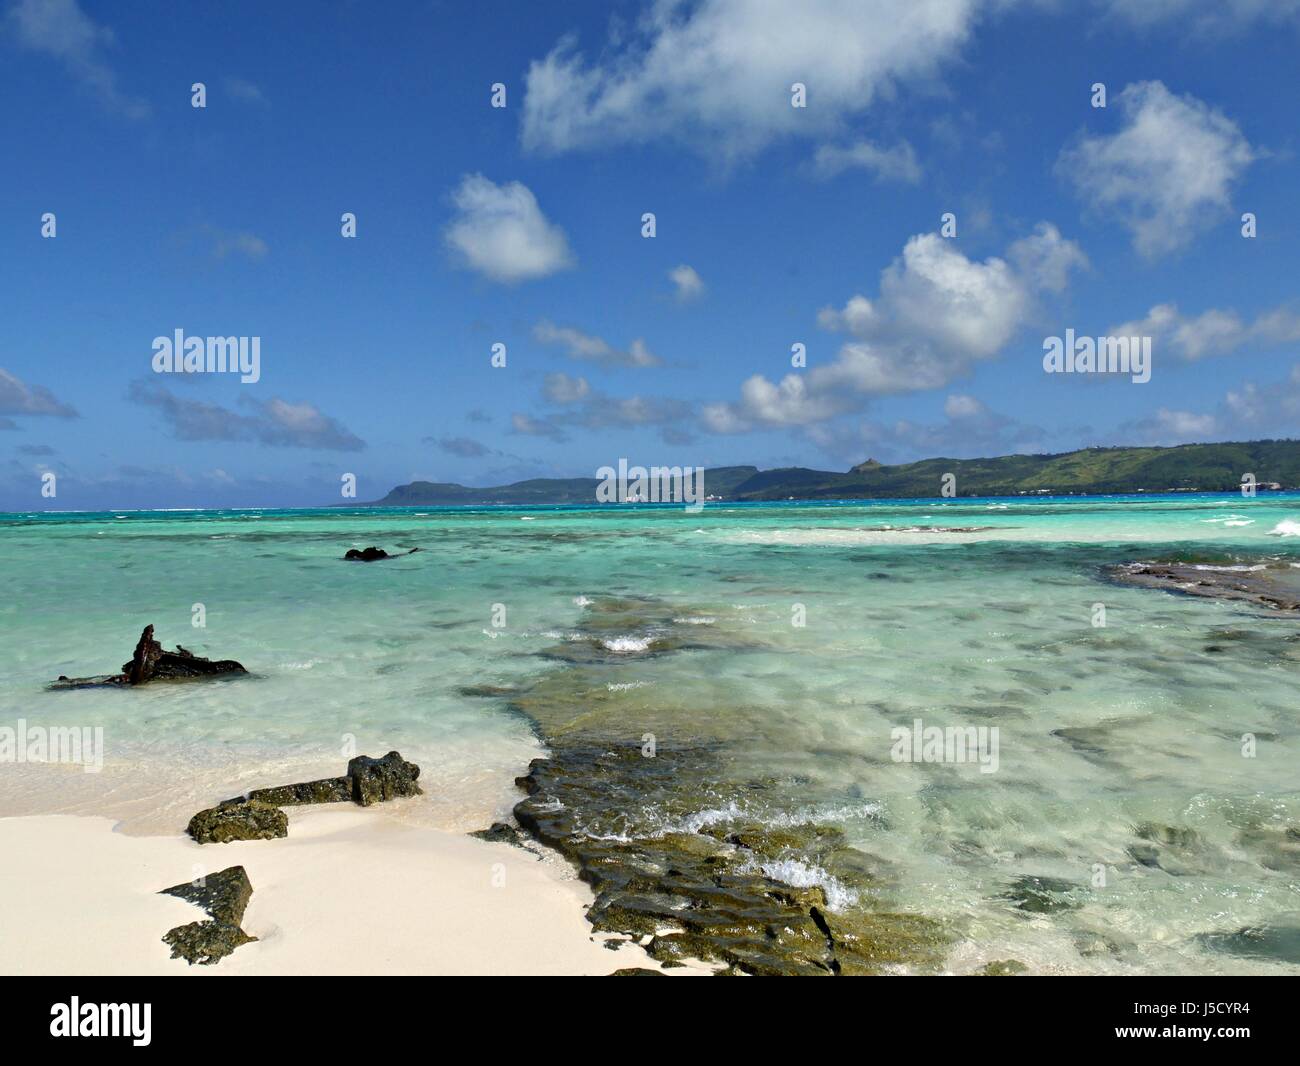 Crystal clear water rolls into the white sandy beaches and corals of Managaha Island Stock Photo